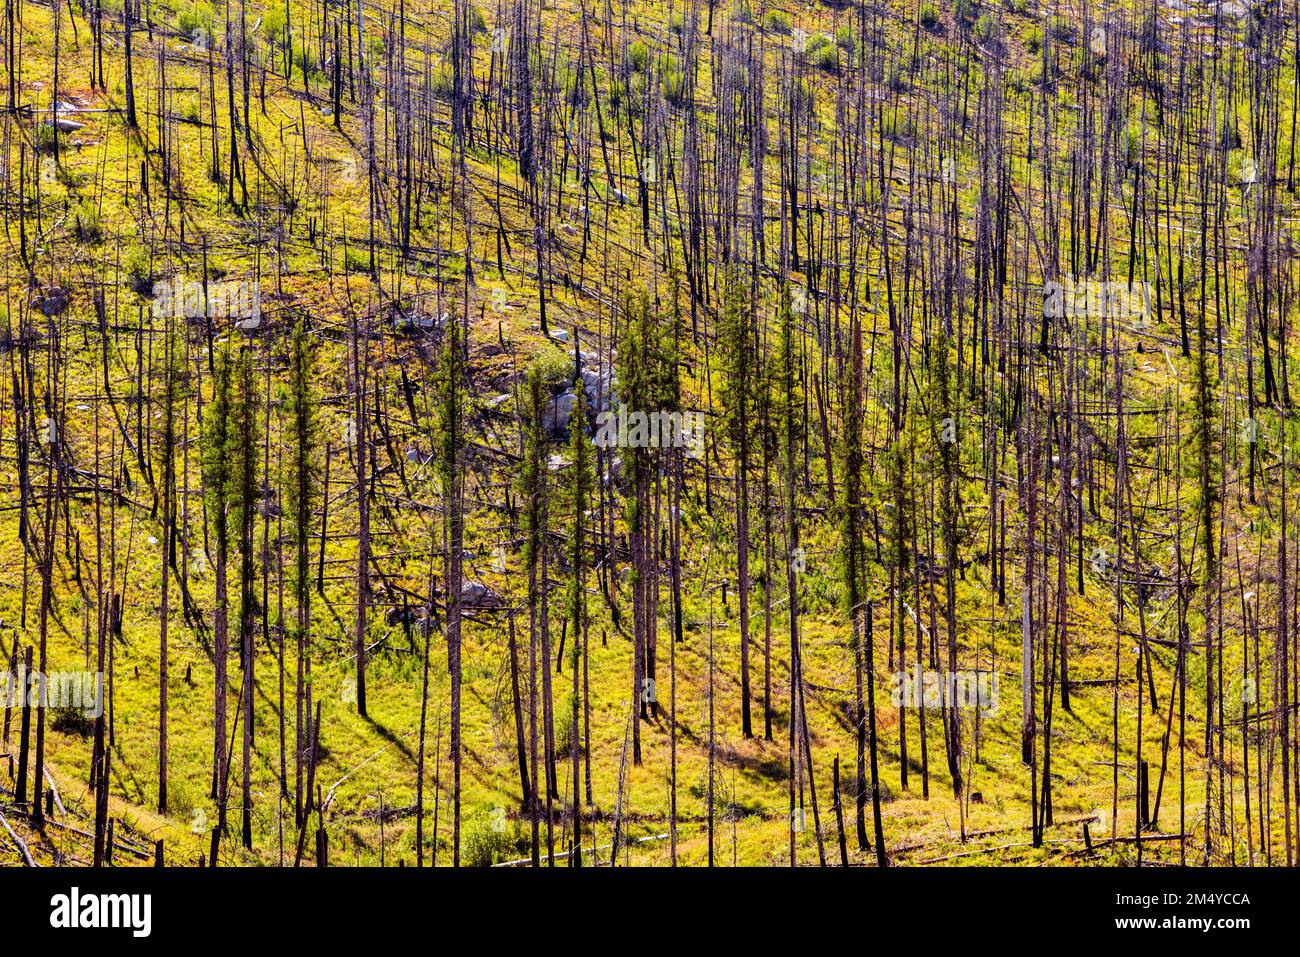 Dead trees; regeneration of trees & plants that burned in forest fire; central Washington state; USA Stock Photo